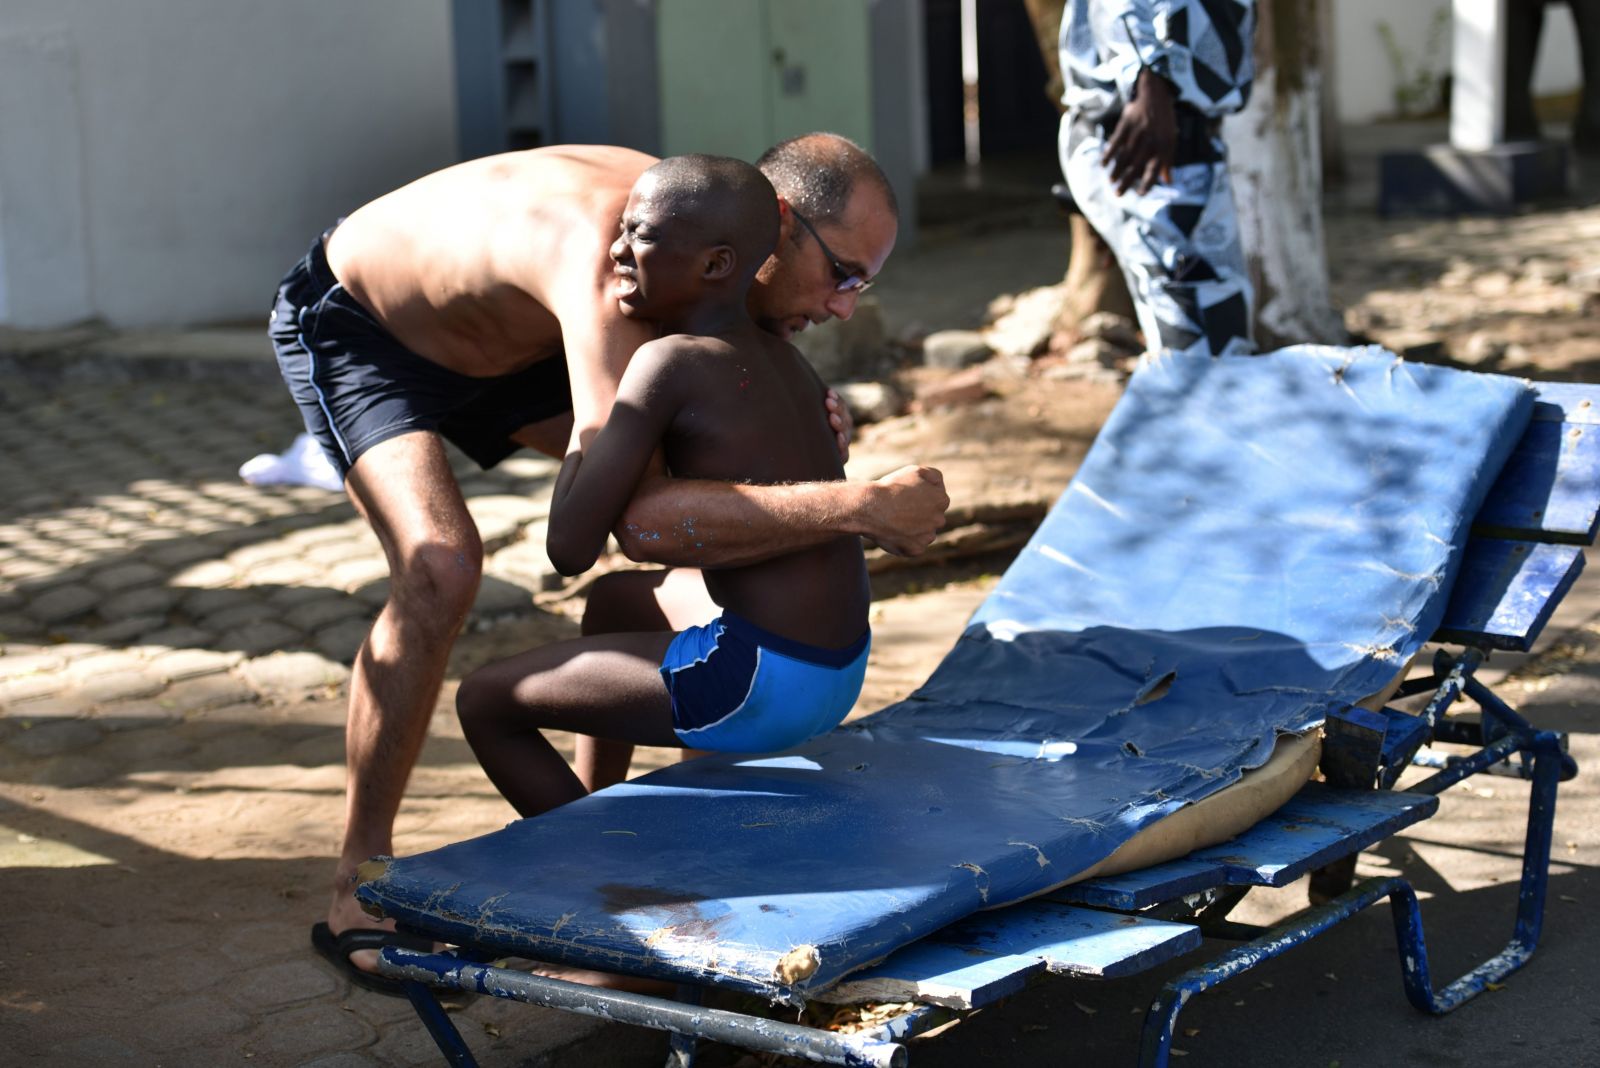 A man helps a wounded child after heavily armed gunmen opened fire on March 13, 2016 at a hotel in the Ivory Coast beach resort of Grand-Bassam. At least five people were killed on March 13 when heavily-armed gunmen opened fire in the Ivory Coast resort town of Grand-Bassam, leaving bodies strewn on the beach. "At the moment there are five dead," a military source said on condition of anonymity after the assault in the resort popular with Westerners. AFP,  SIA-KAMBOU